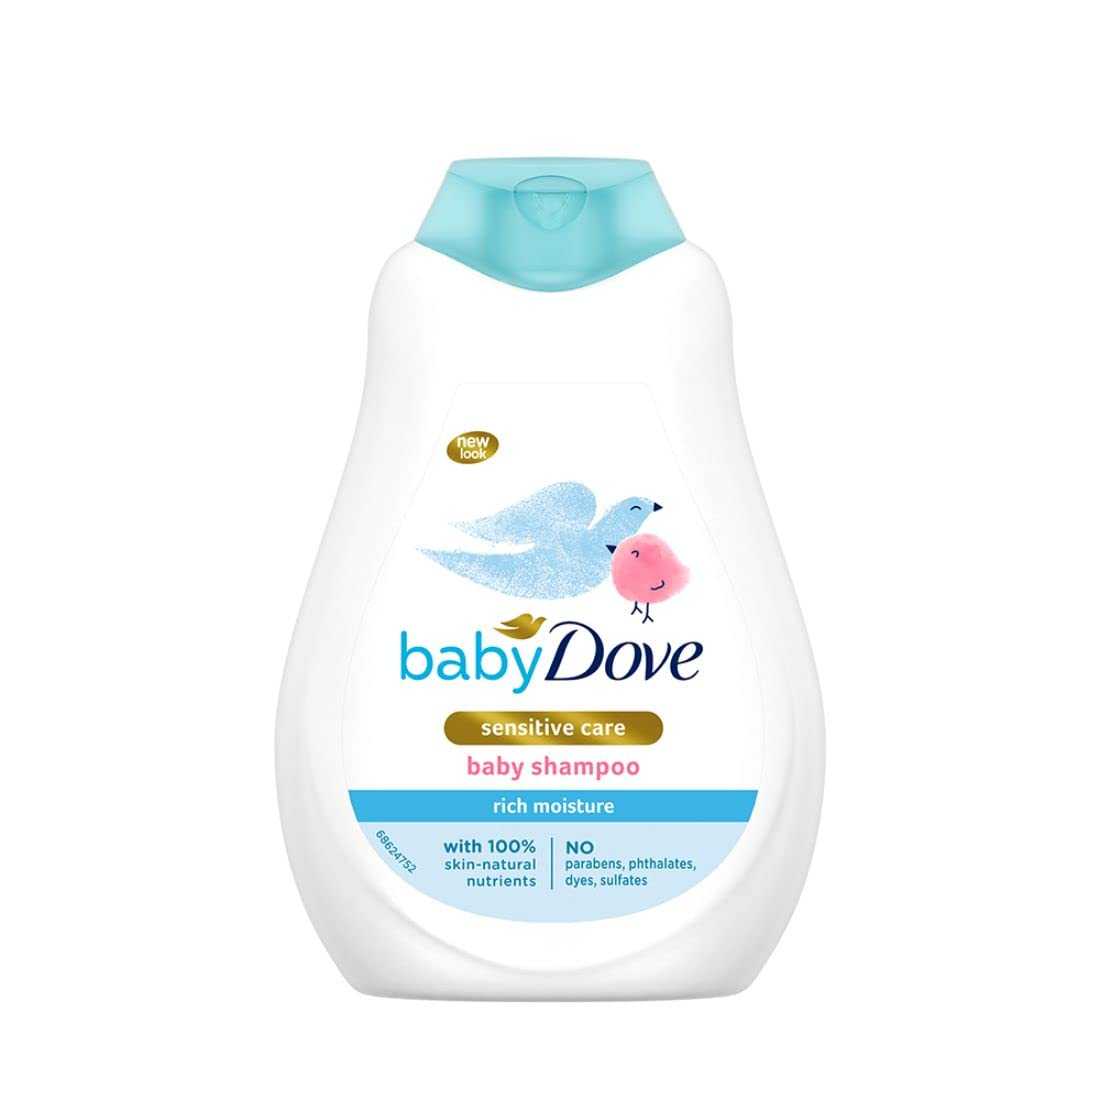 Best baby shampoo in India